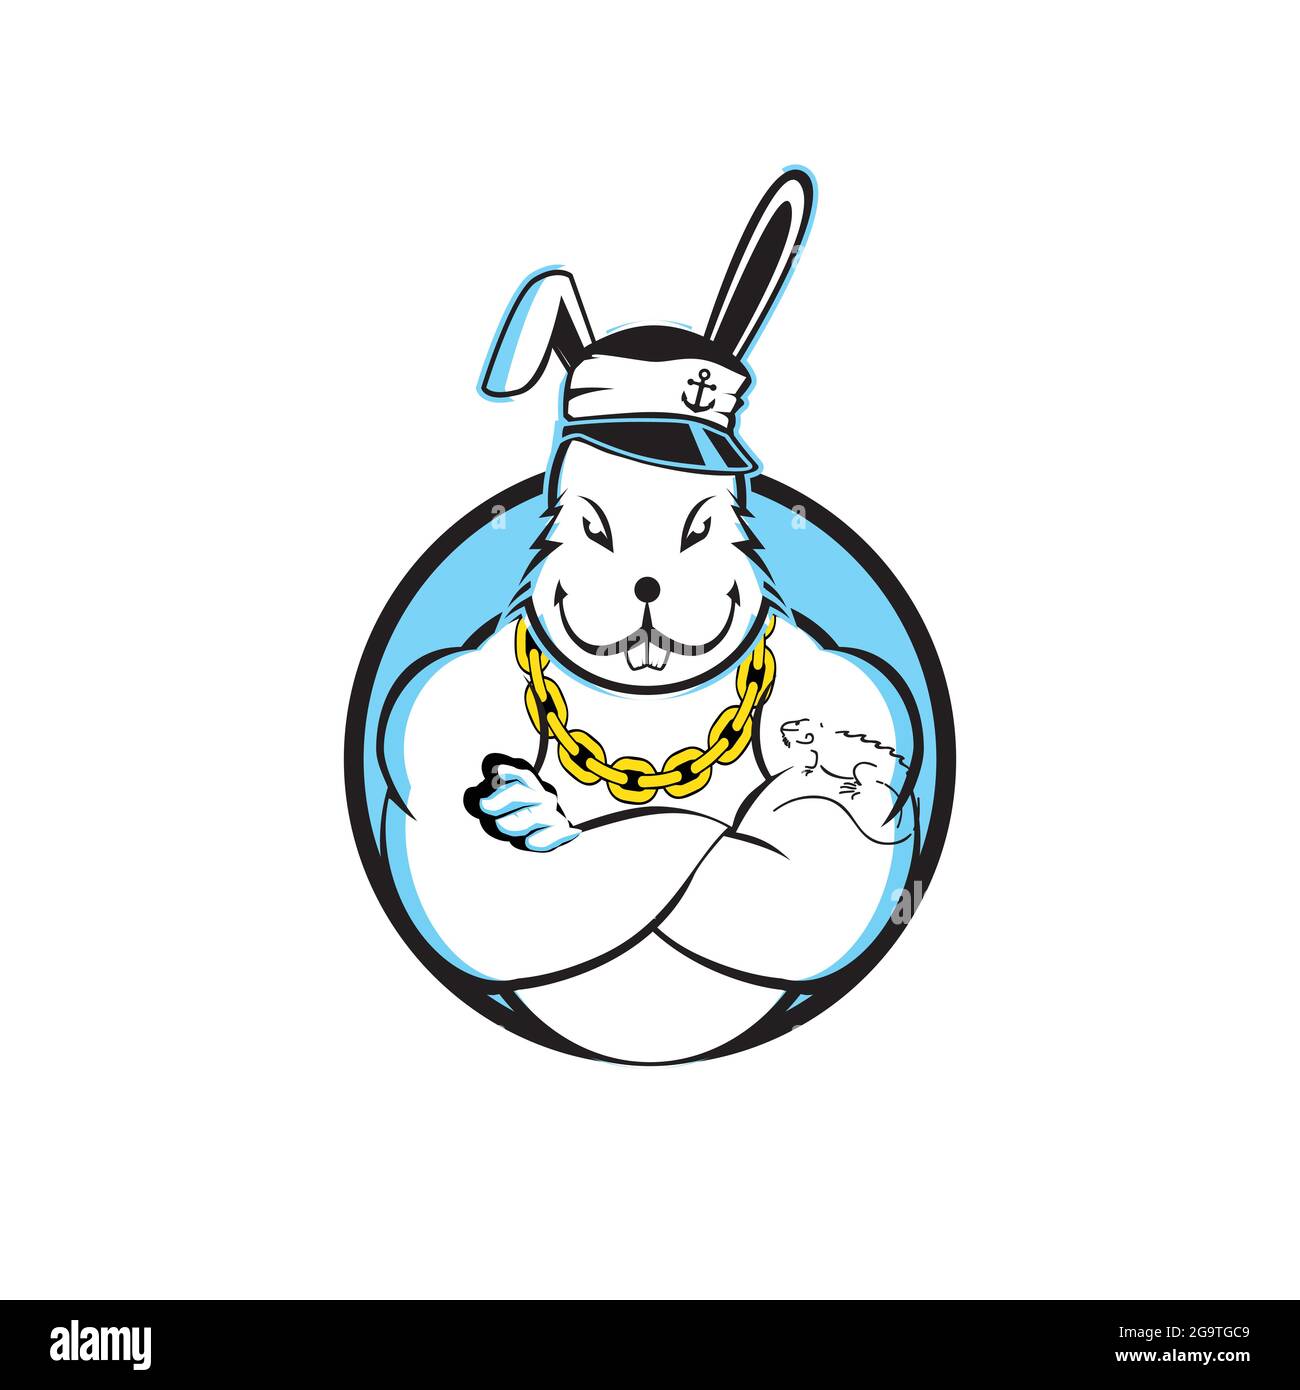 Rabbit muscle Stock Vector Images - Alamy